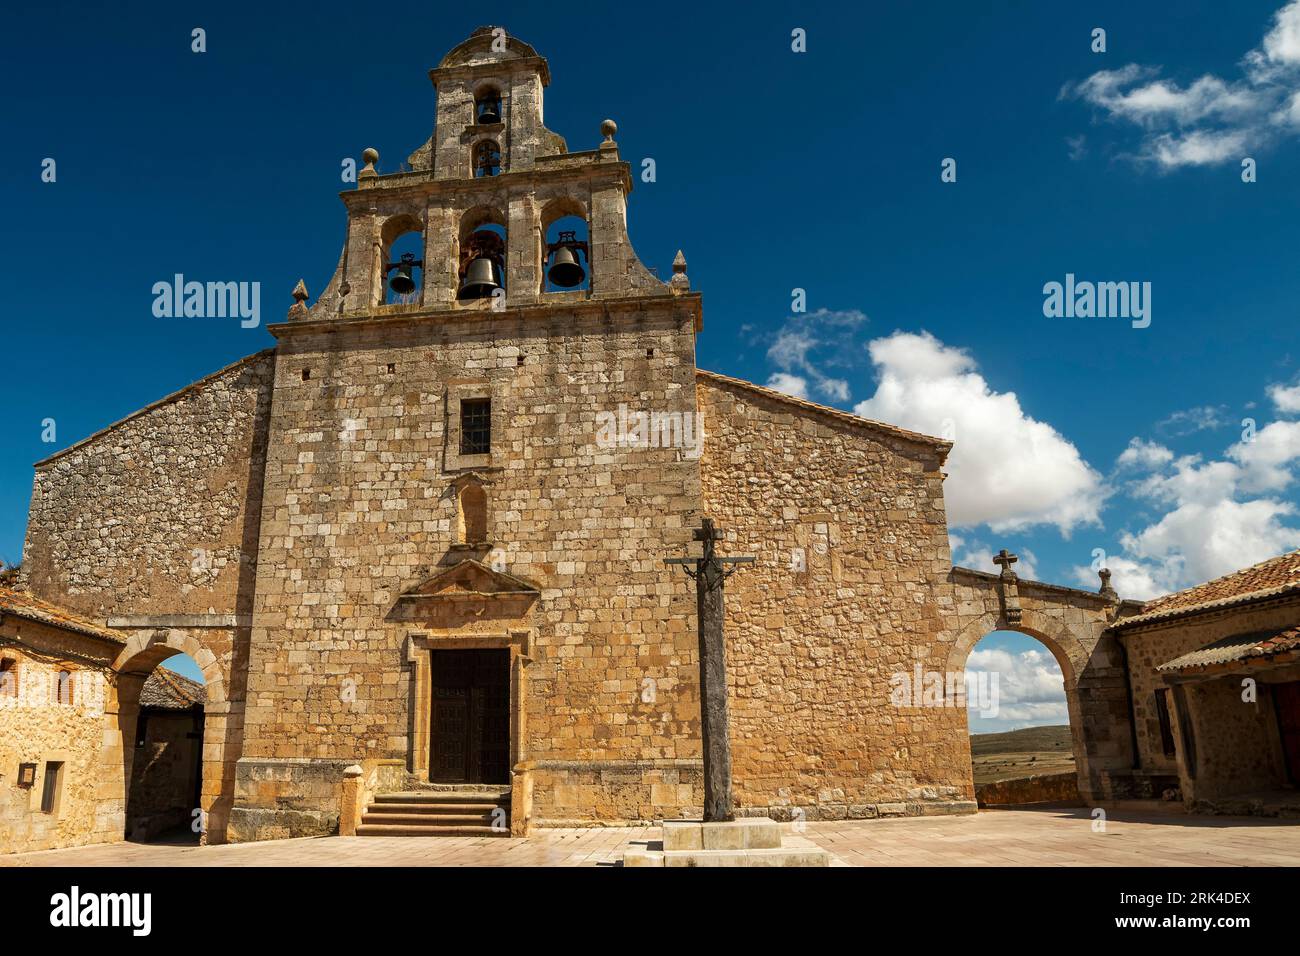 This impressive photograph of the church of Santa María in Maderuelo, Segovia, shows the beauty and the historical and cultural heritage of Spain. Stock Photo